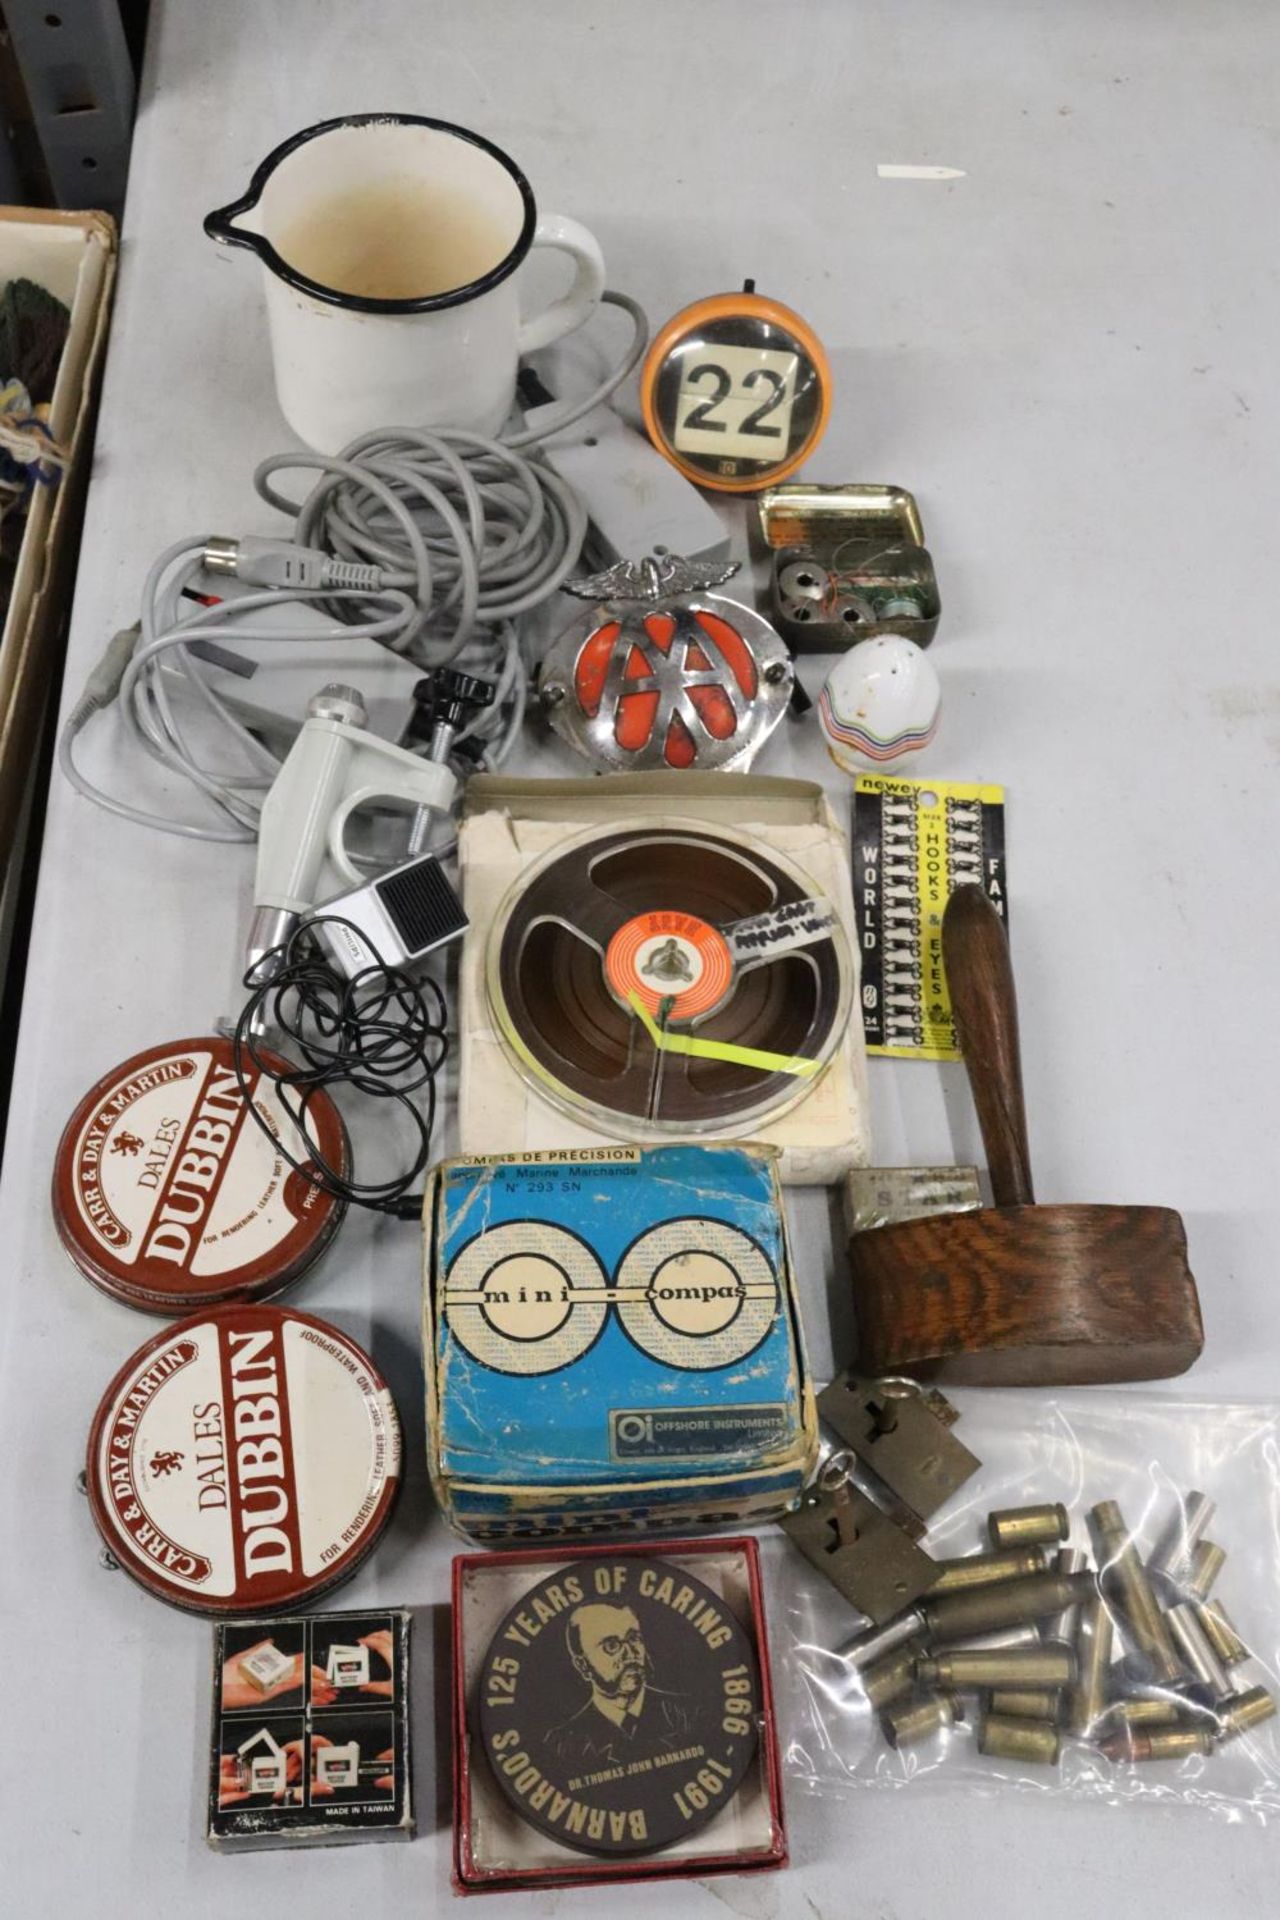 A MIXED VINTAGE LOT TO INCLUDE AN AA BADGE, DESK CALENDAR, 'MINI-COMPAS', LOCKS, GAVEL, TINS, ETC - Image 4 of 8